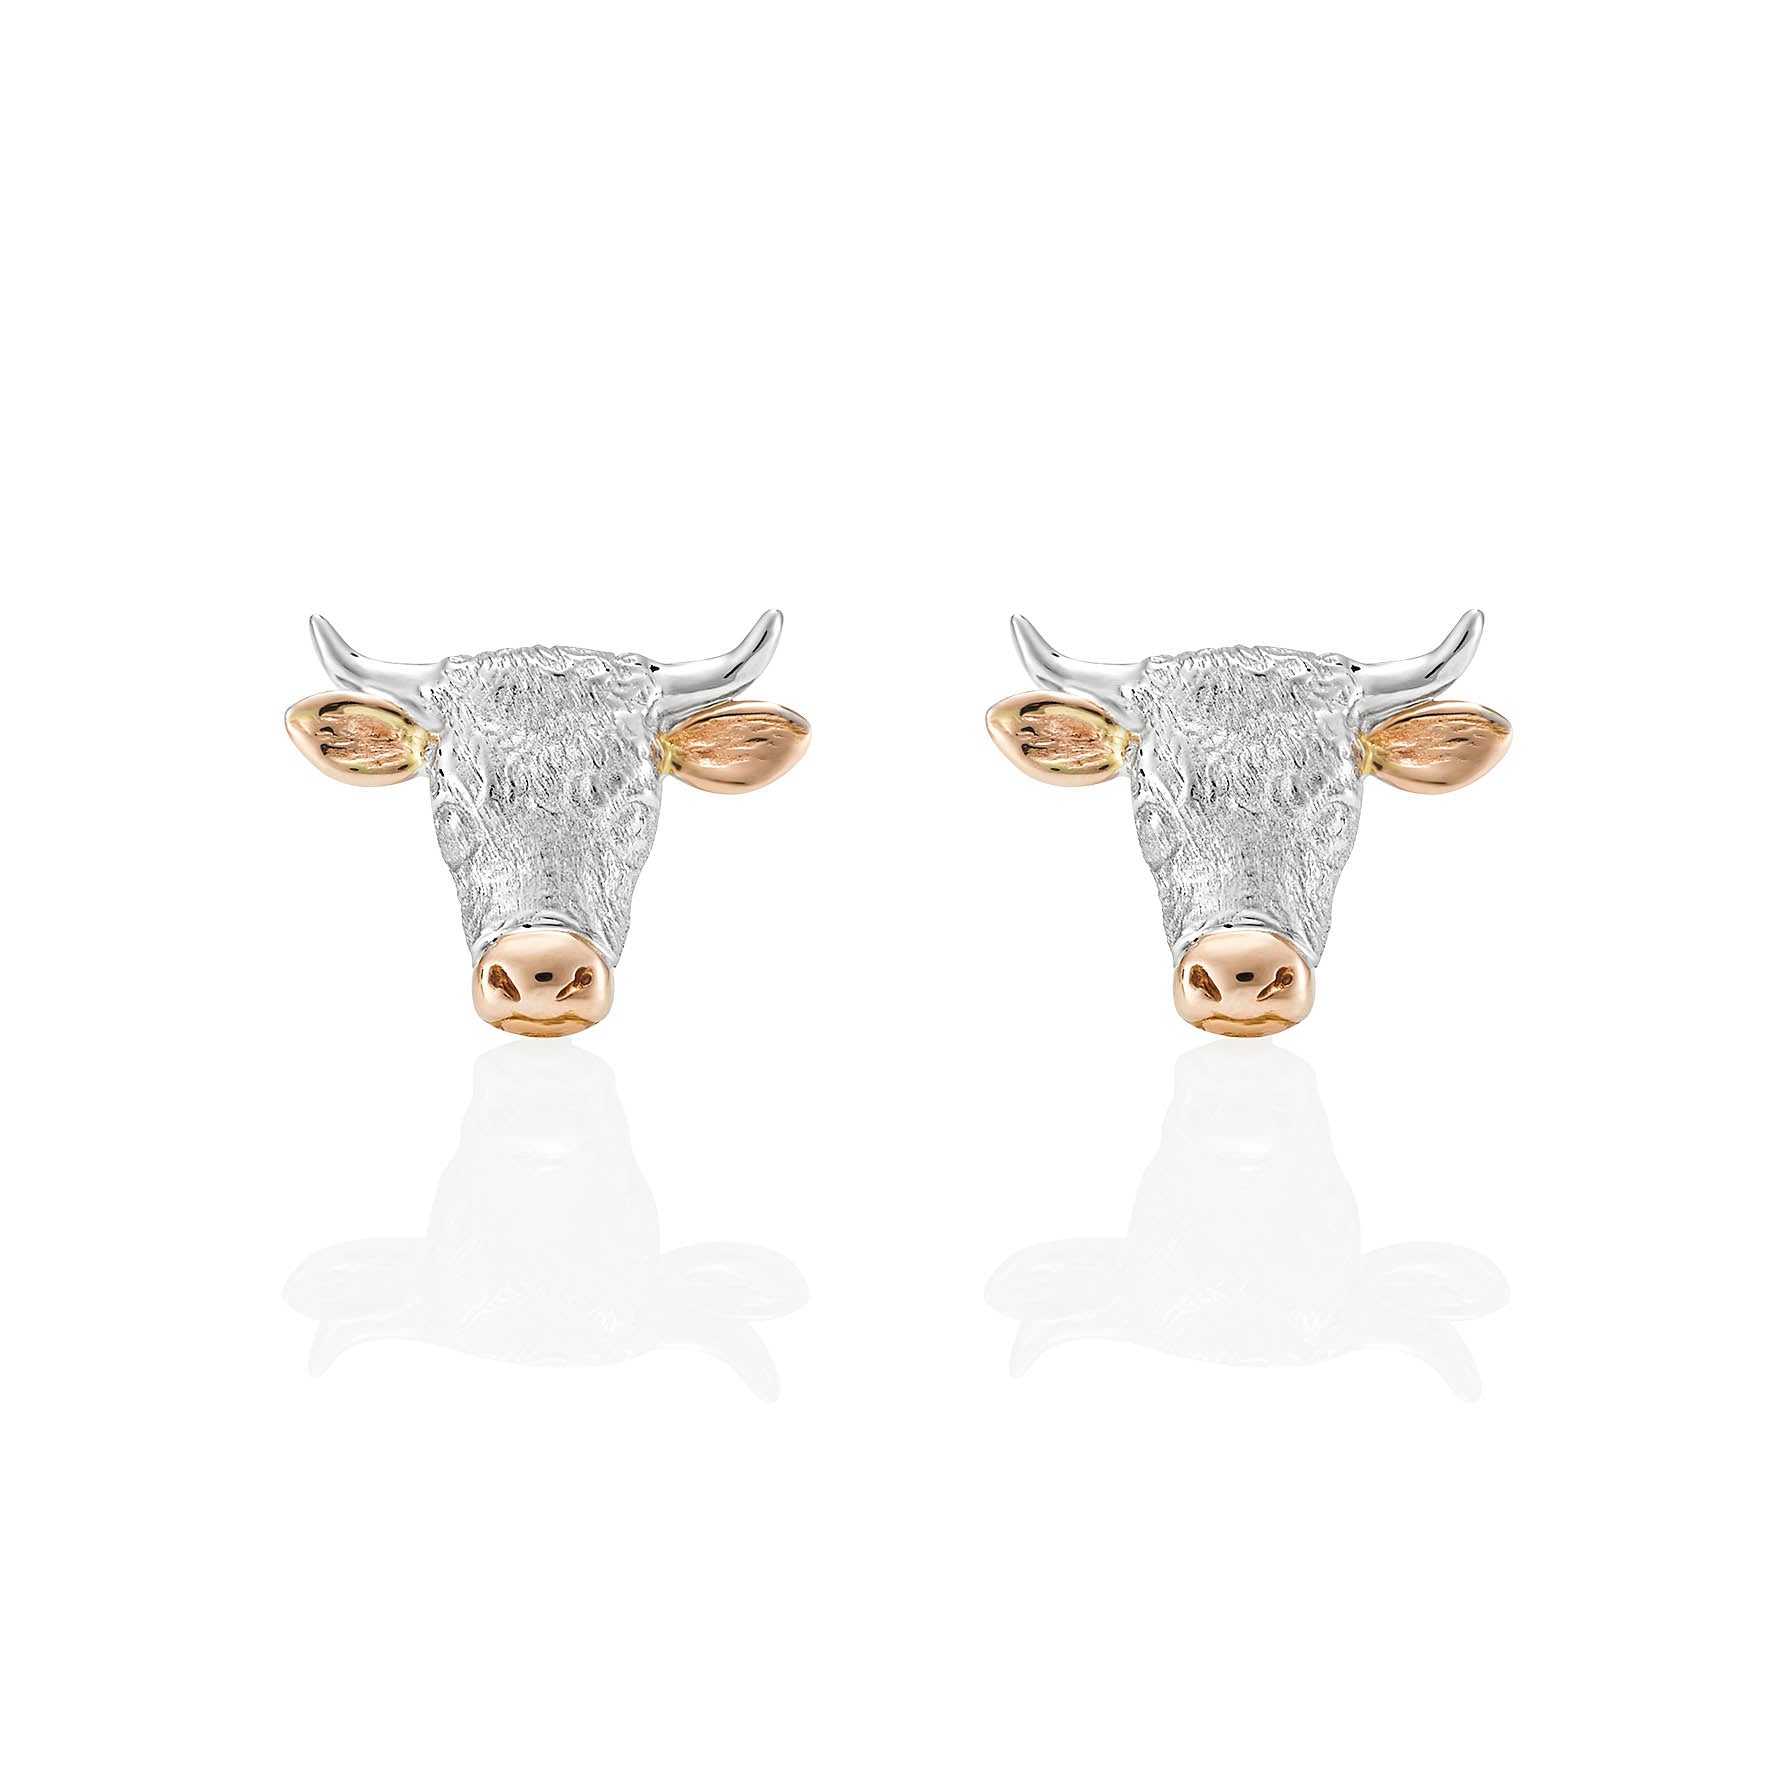 Hereford Stud Earrings in Two Tone 18ct White and Yellow Gold